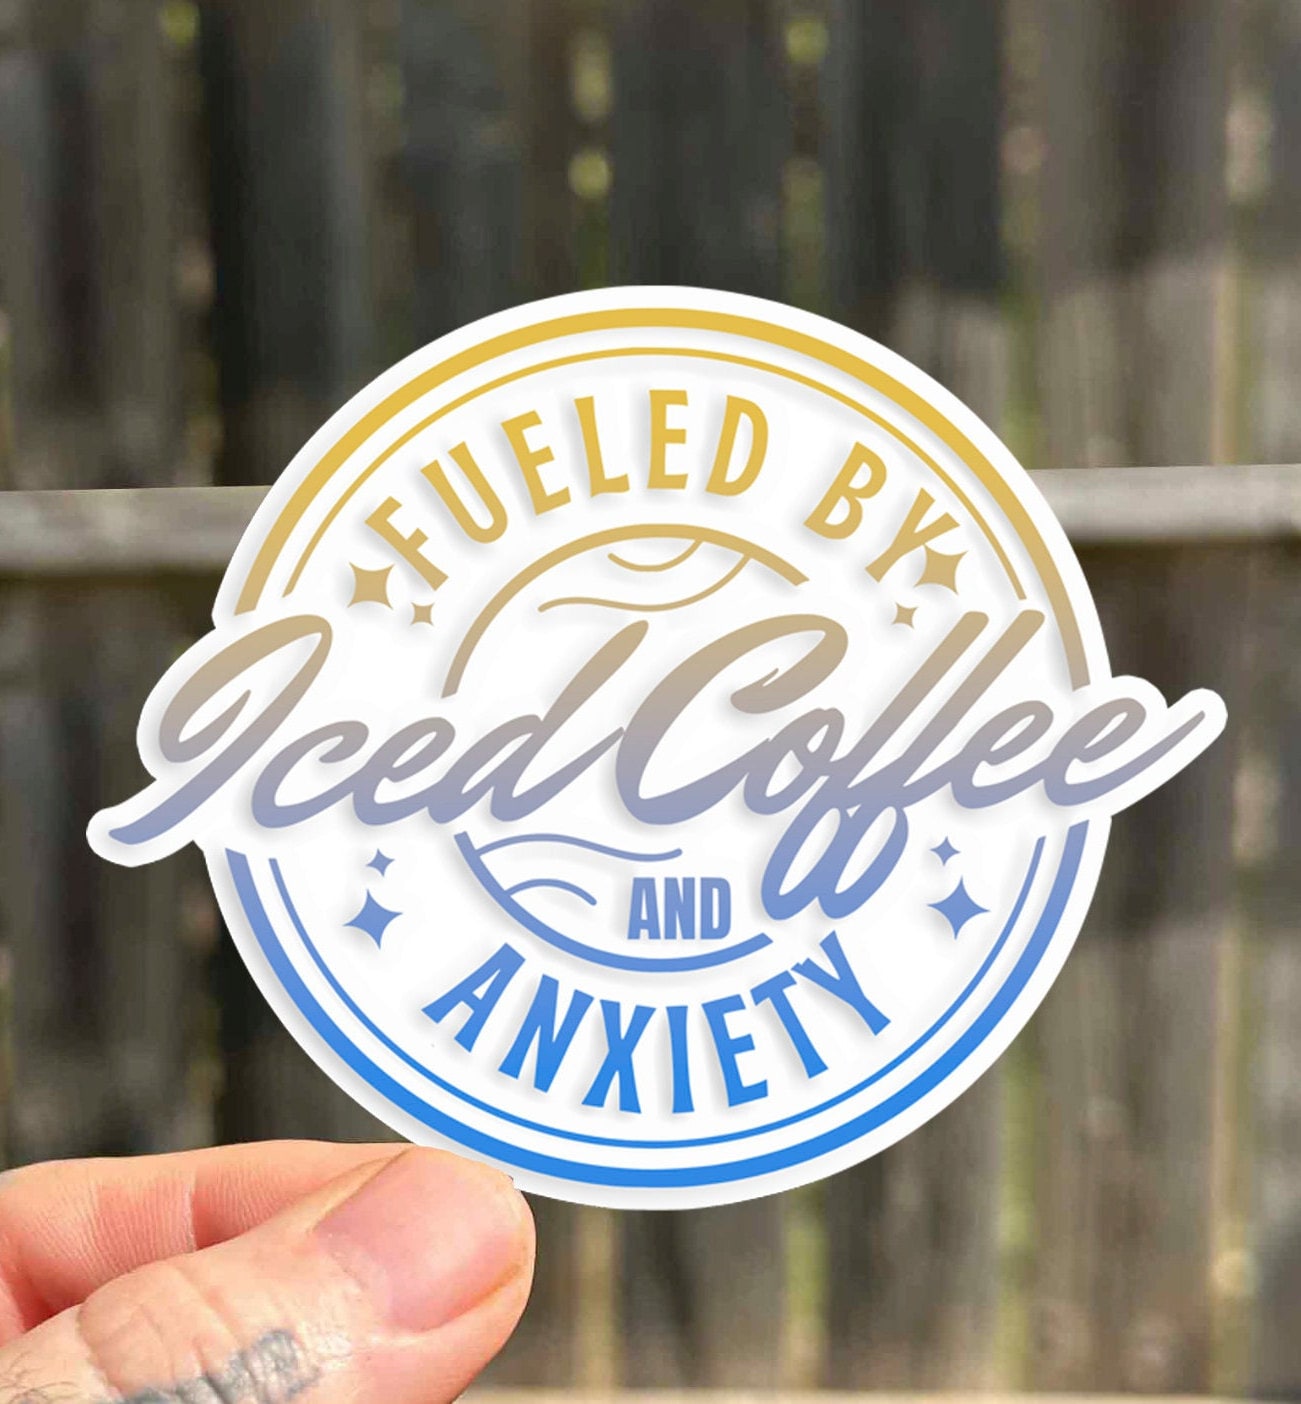 Mental Health Fuelled by Anxiety Sticker, Anxious Sticker, Funny Therapy,  Kindle Decoration, Laptop, Mental Health Awareness, Quote Stickers 